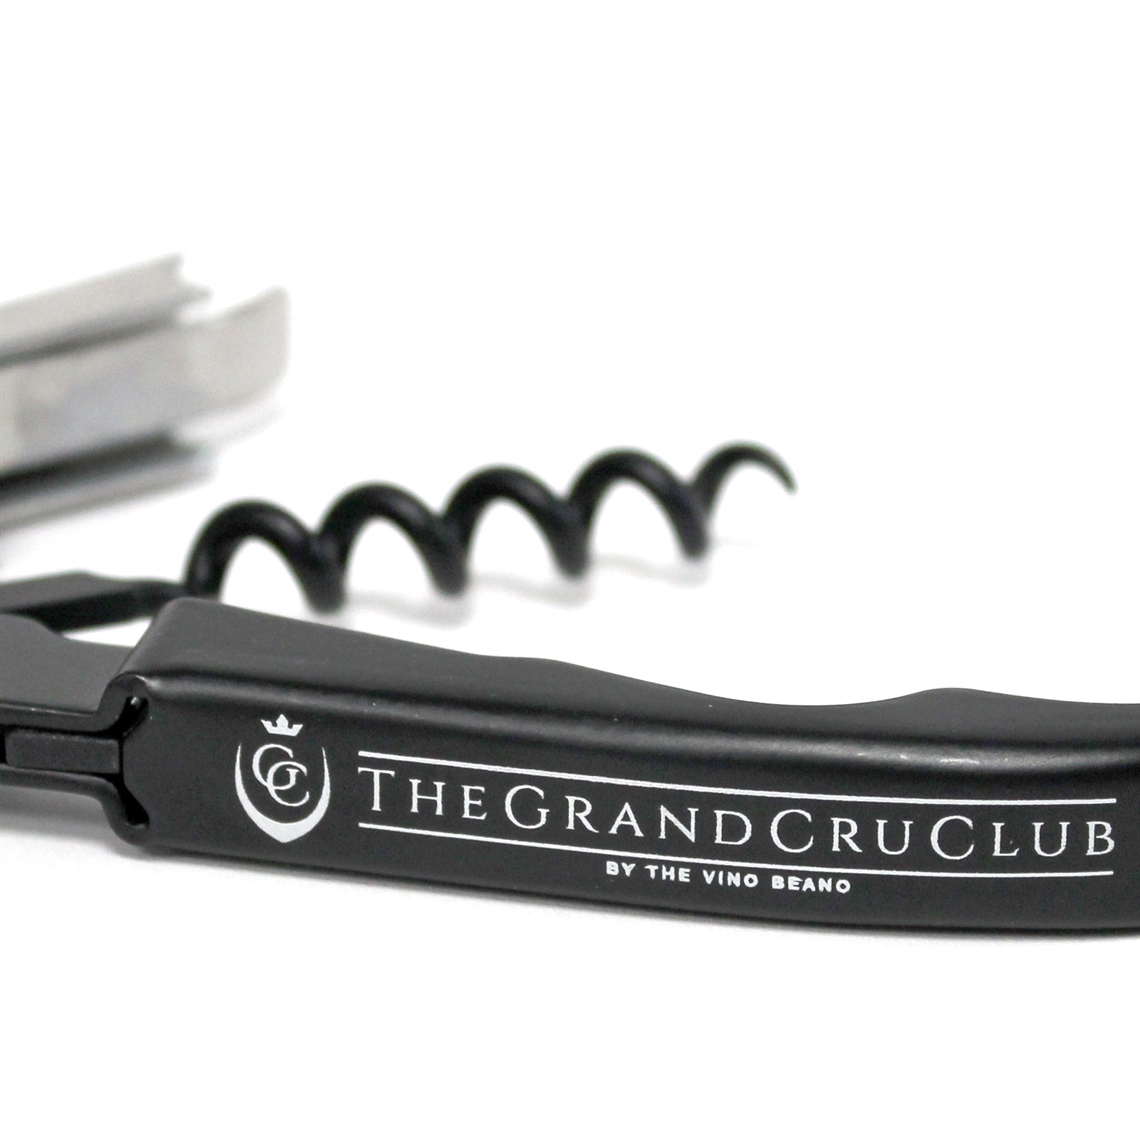 View more laguiole hand crafted corkscrews from our Branded Corkscrews & Bottle Openers range